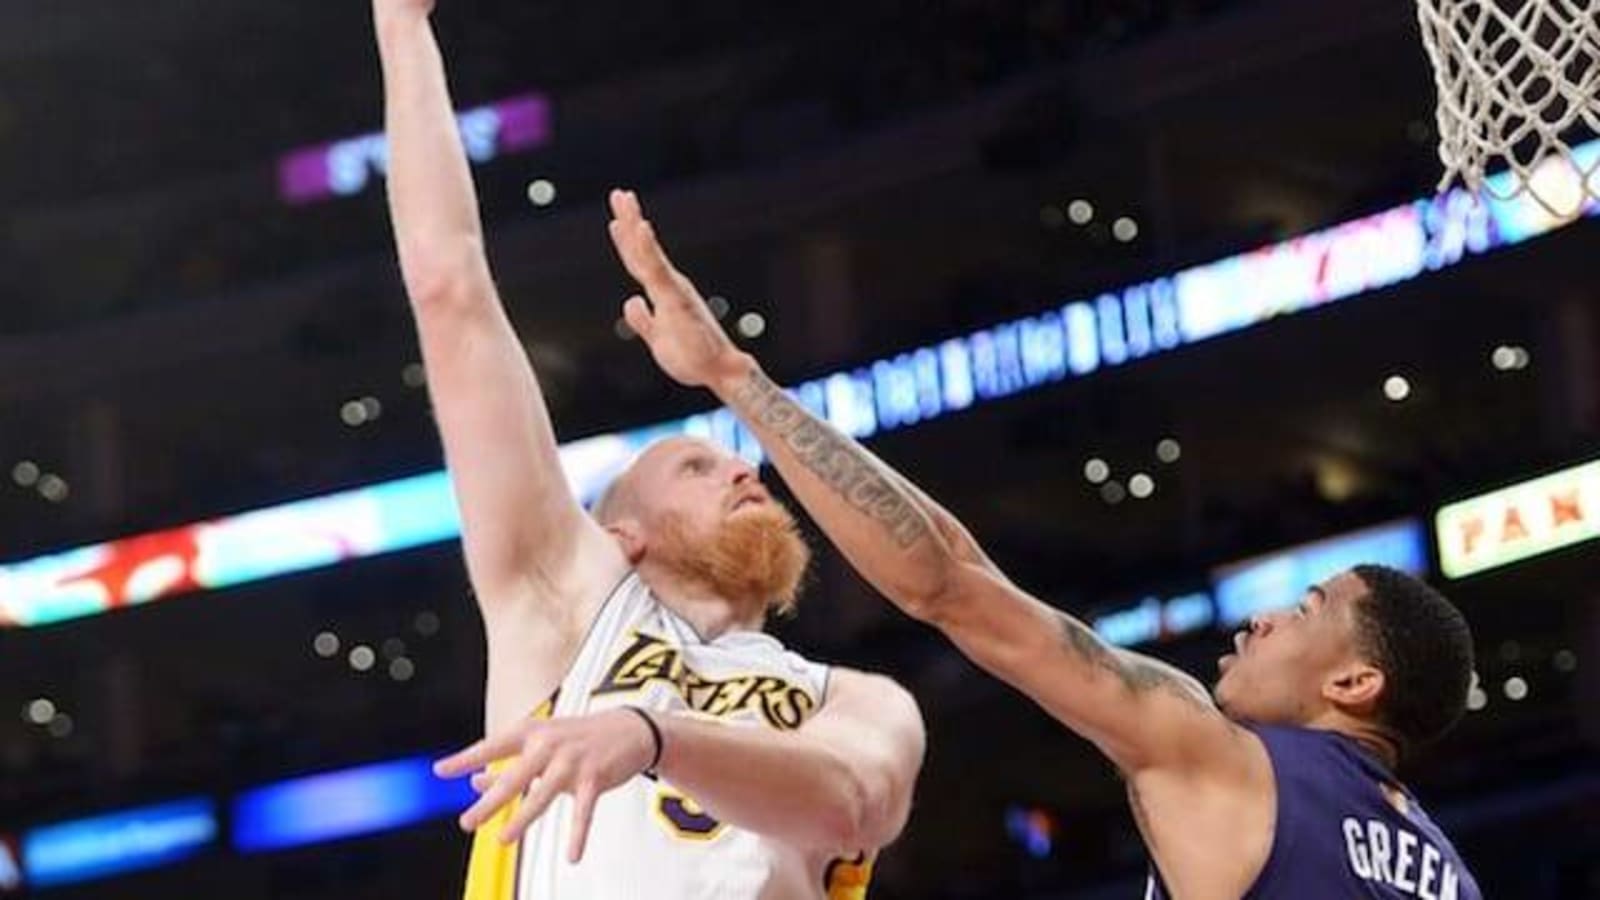 This Day In Lakers History: Chris Kaman Dominates To Dash Suns’ Playoff Hopes